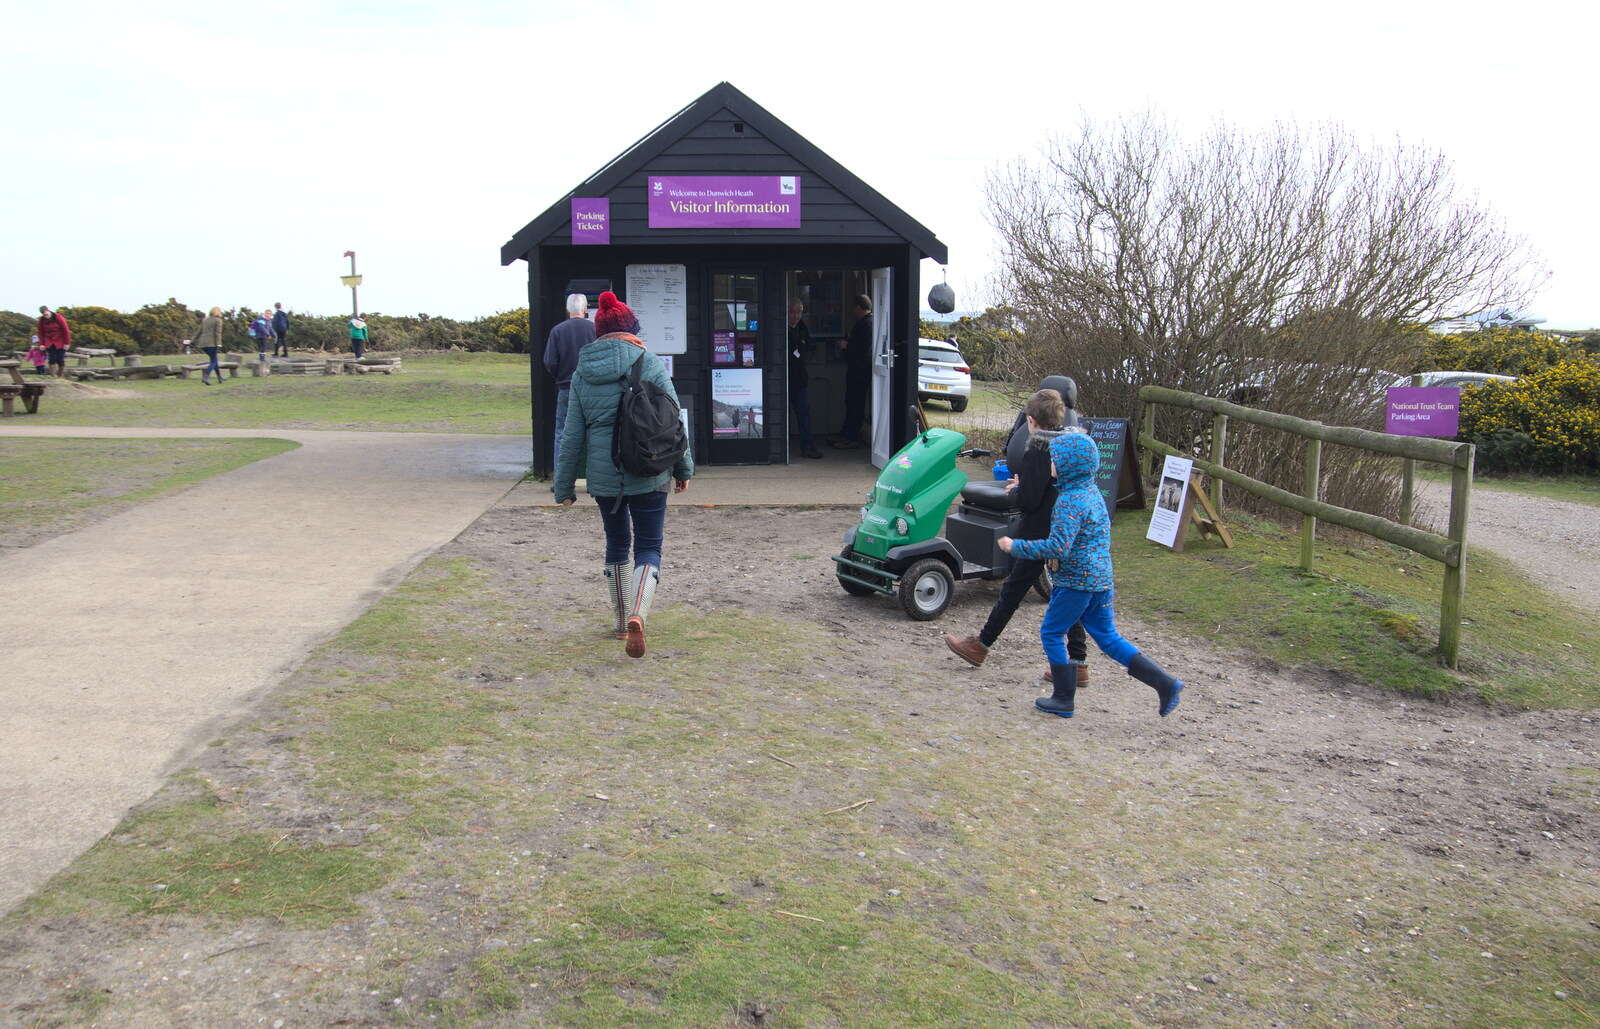 Isobel heads off to the ticket office from A Trip to Dunwich Heath, Dunwich, Suffolk - 17th February 2019